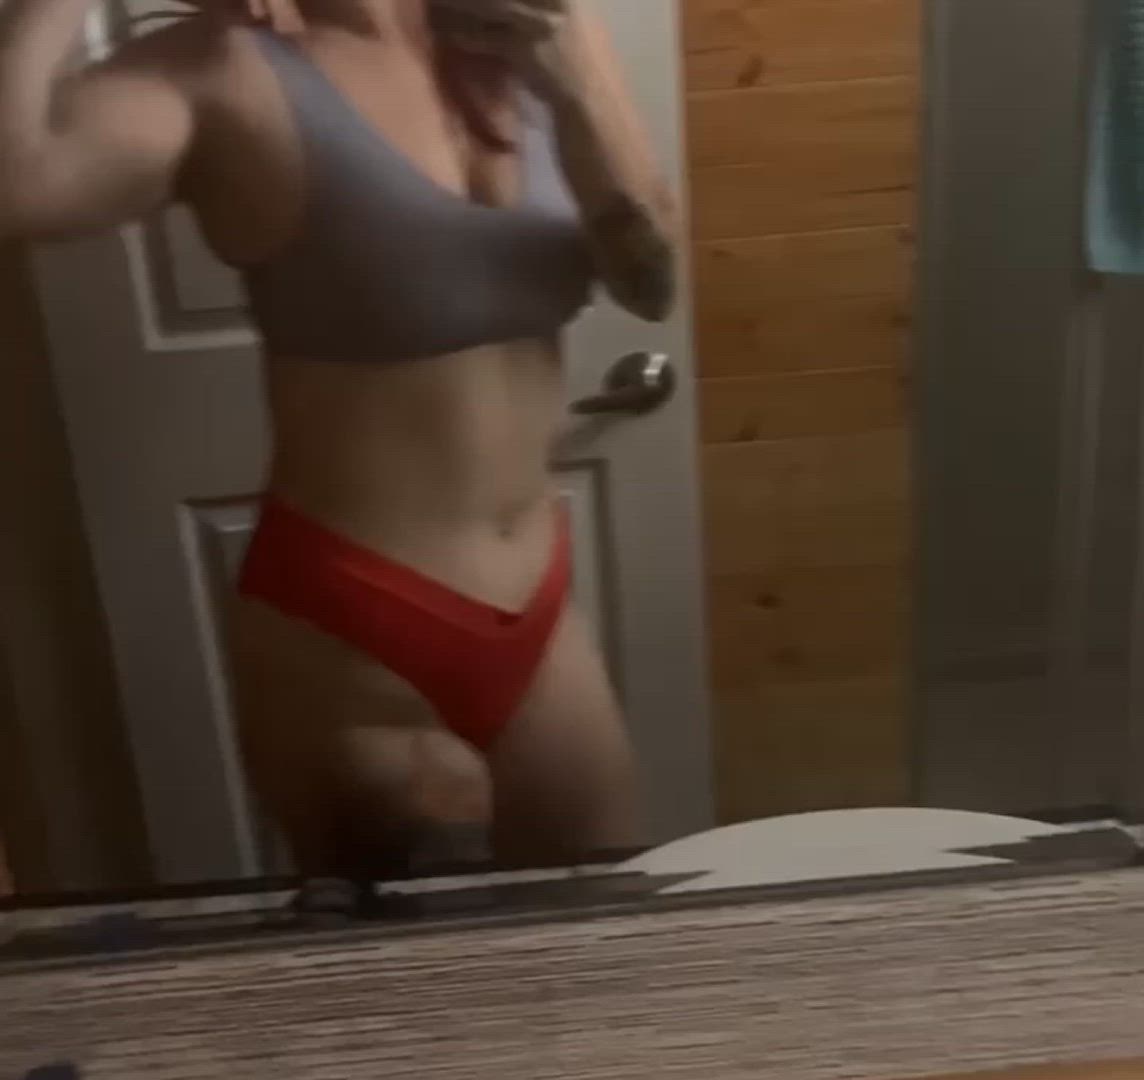 Redhead porn video with onlyfans model redraspberryxxo <strong>@redraspberryxxo</strong>